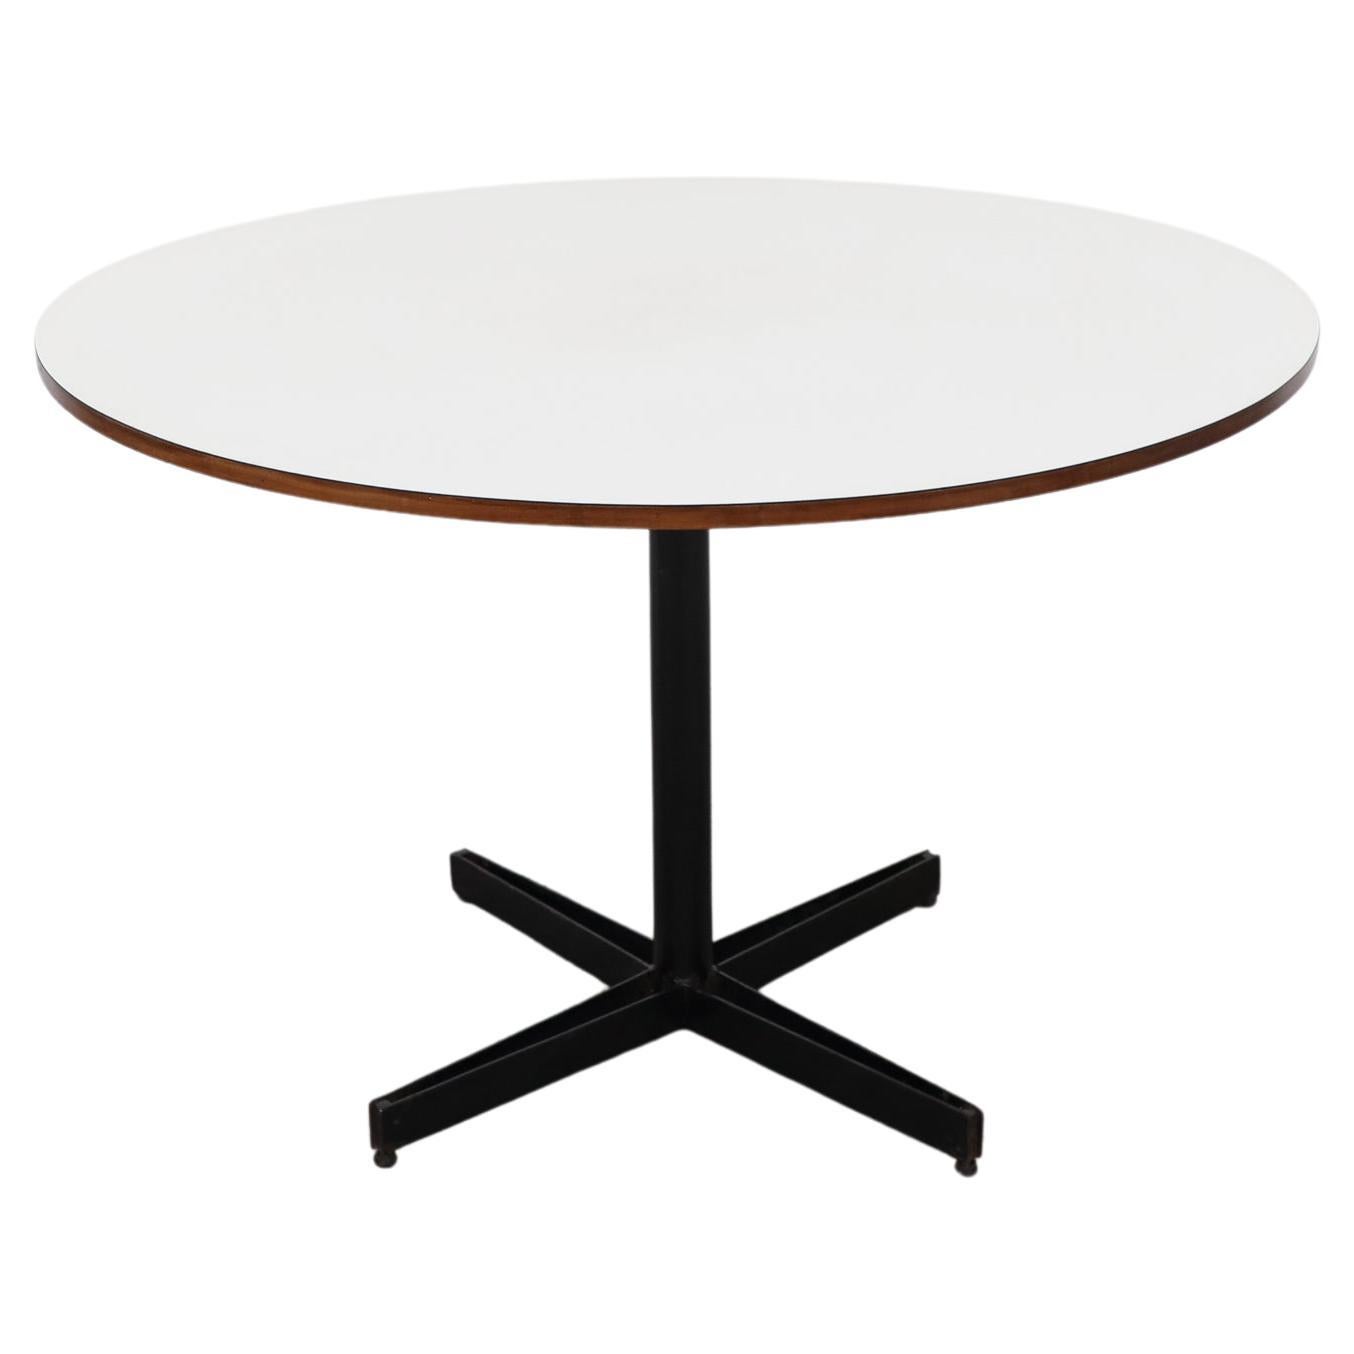 Osvaldo Borsani enameled metal pedestal table with white laminate top and teak edging. This simple flat metal fabrication highlights play with negative space. the metal is in original condition with signs of enamel loss and wear. The top shows